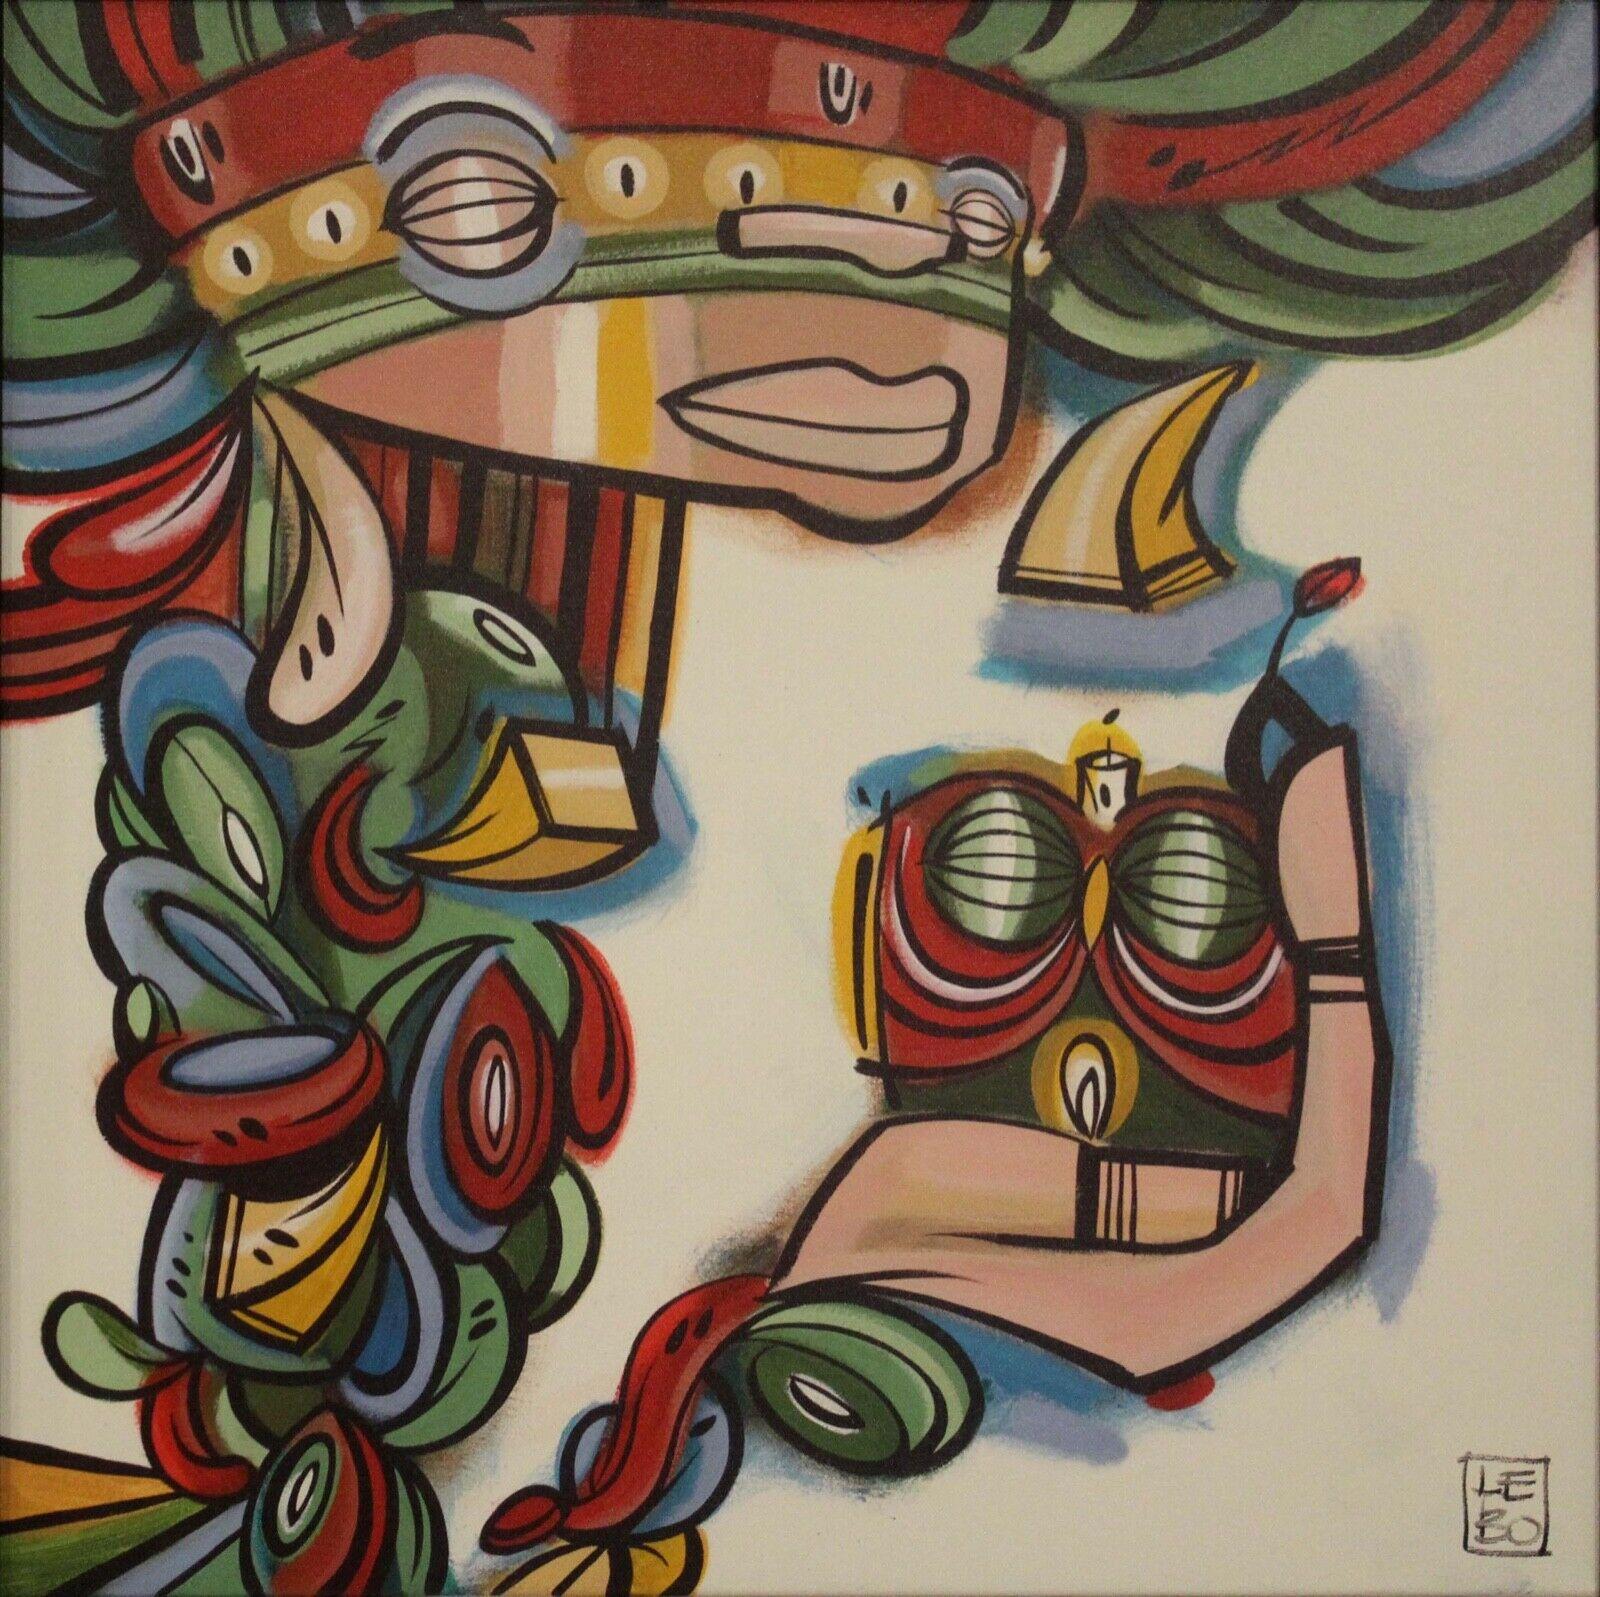 Le Shoppe Too in Michigan brings you this color giclee on canvas titled 'In Search Of Wisdom' by David Le Betard Lebo. Signed by the artist with annotation on the verso, 300/350, this framed piece exemplifies the Miami artists exuberant style